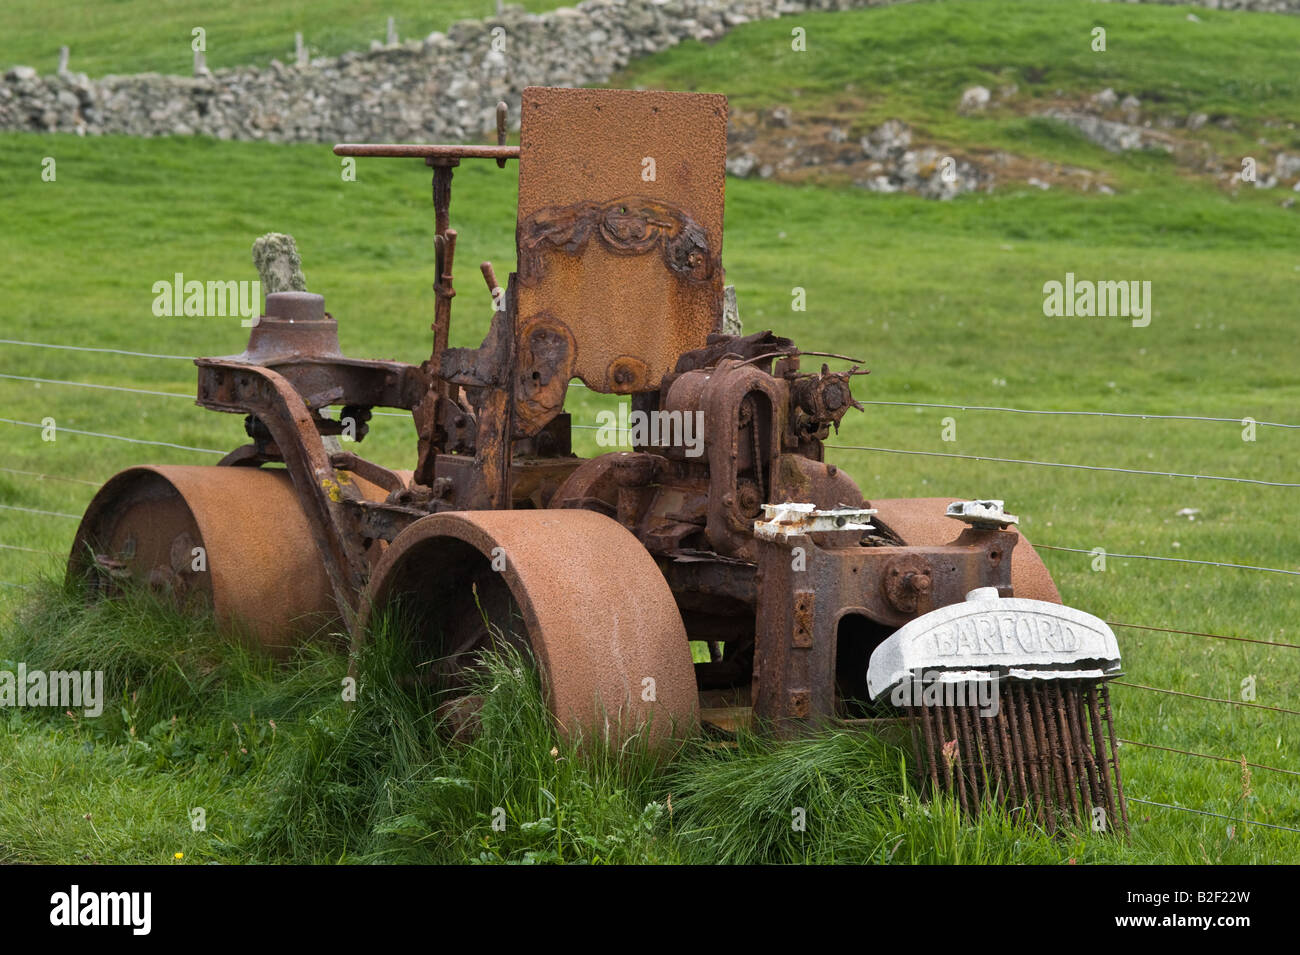 Barford roller, rusty abandoned machinery, on the pasture, side of the road, Fair Isle, Shetland Islands, Scotland, June Stock Photo